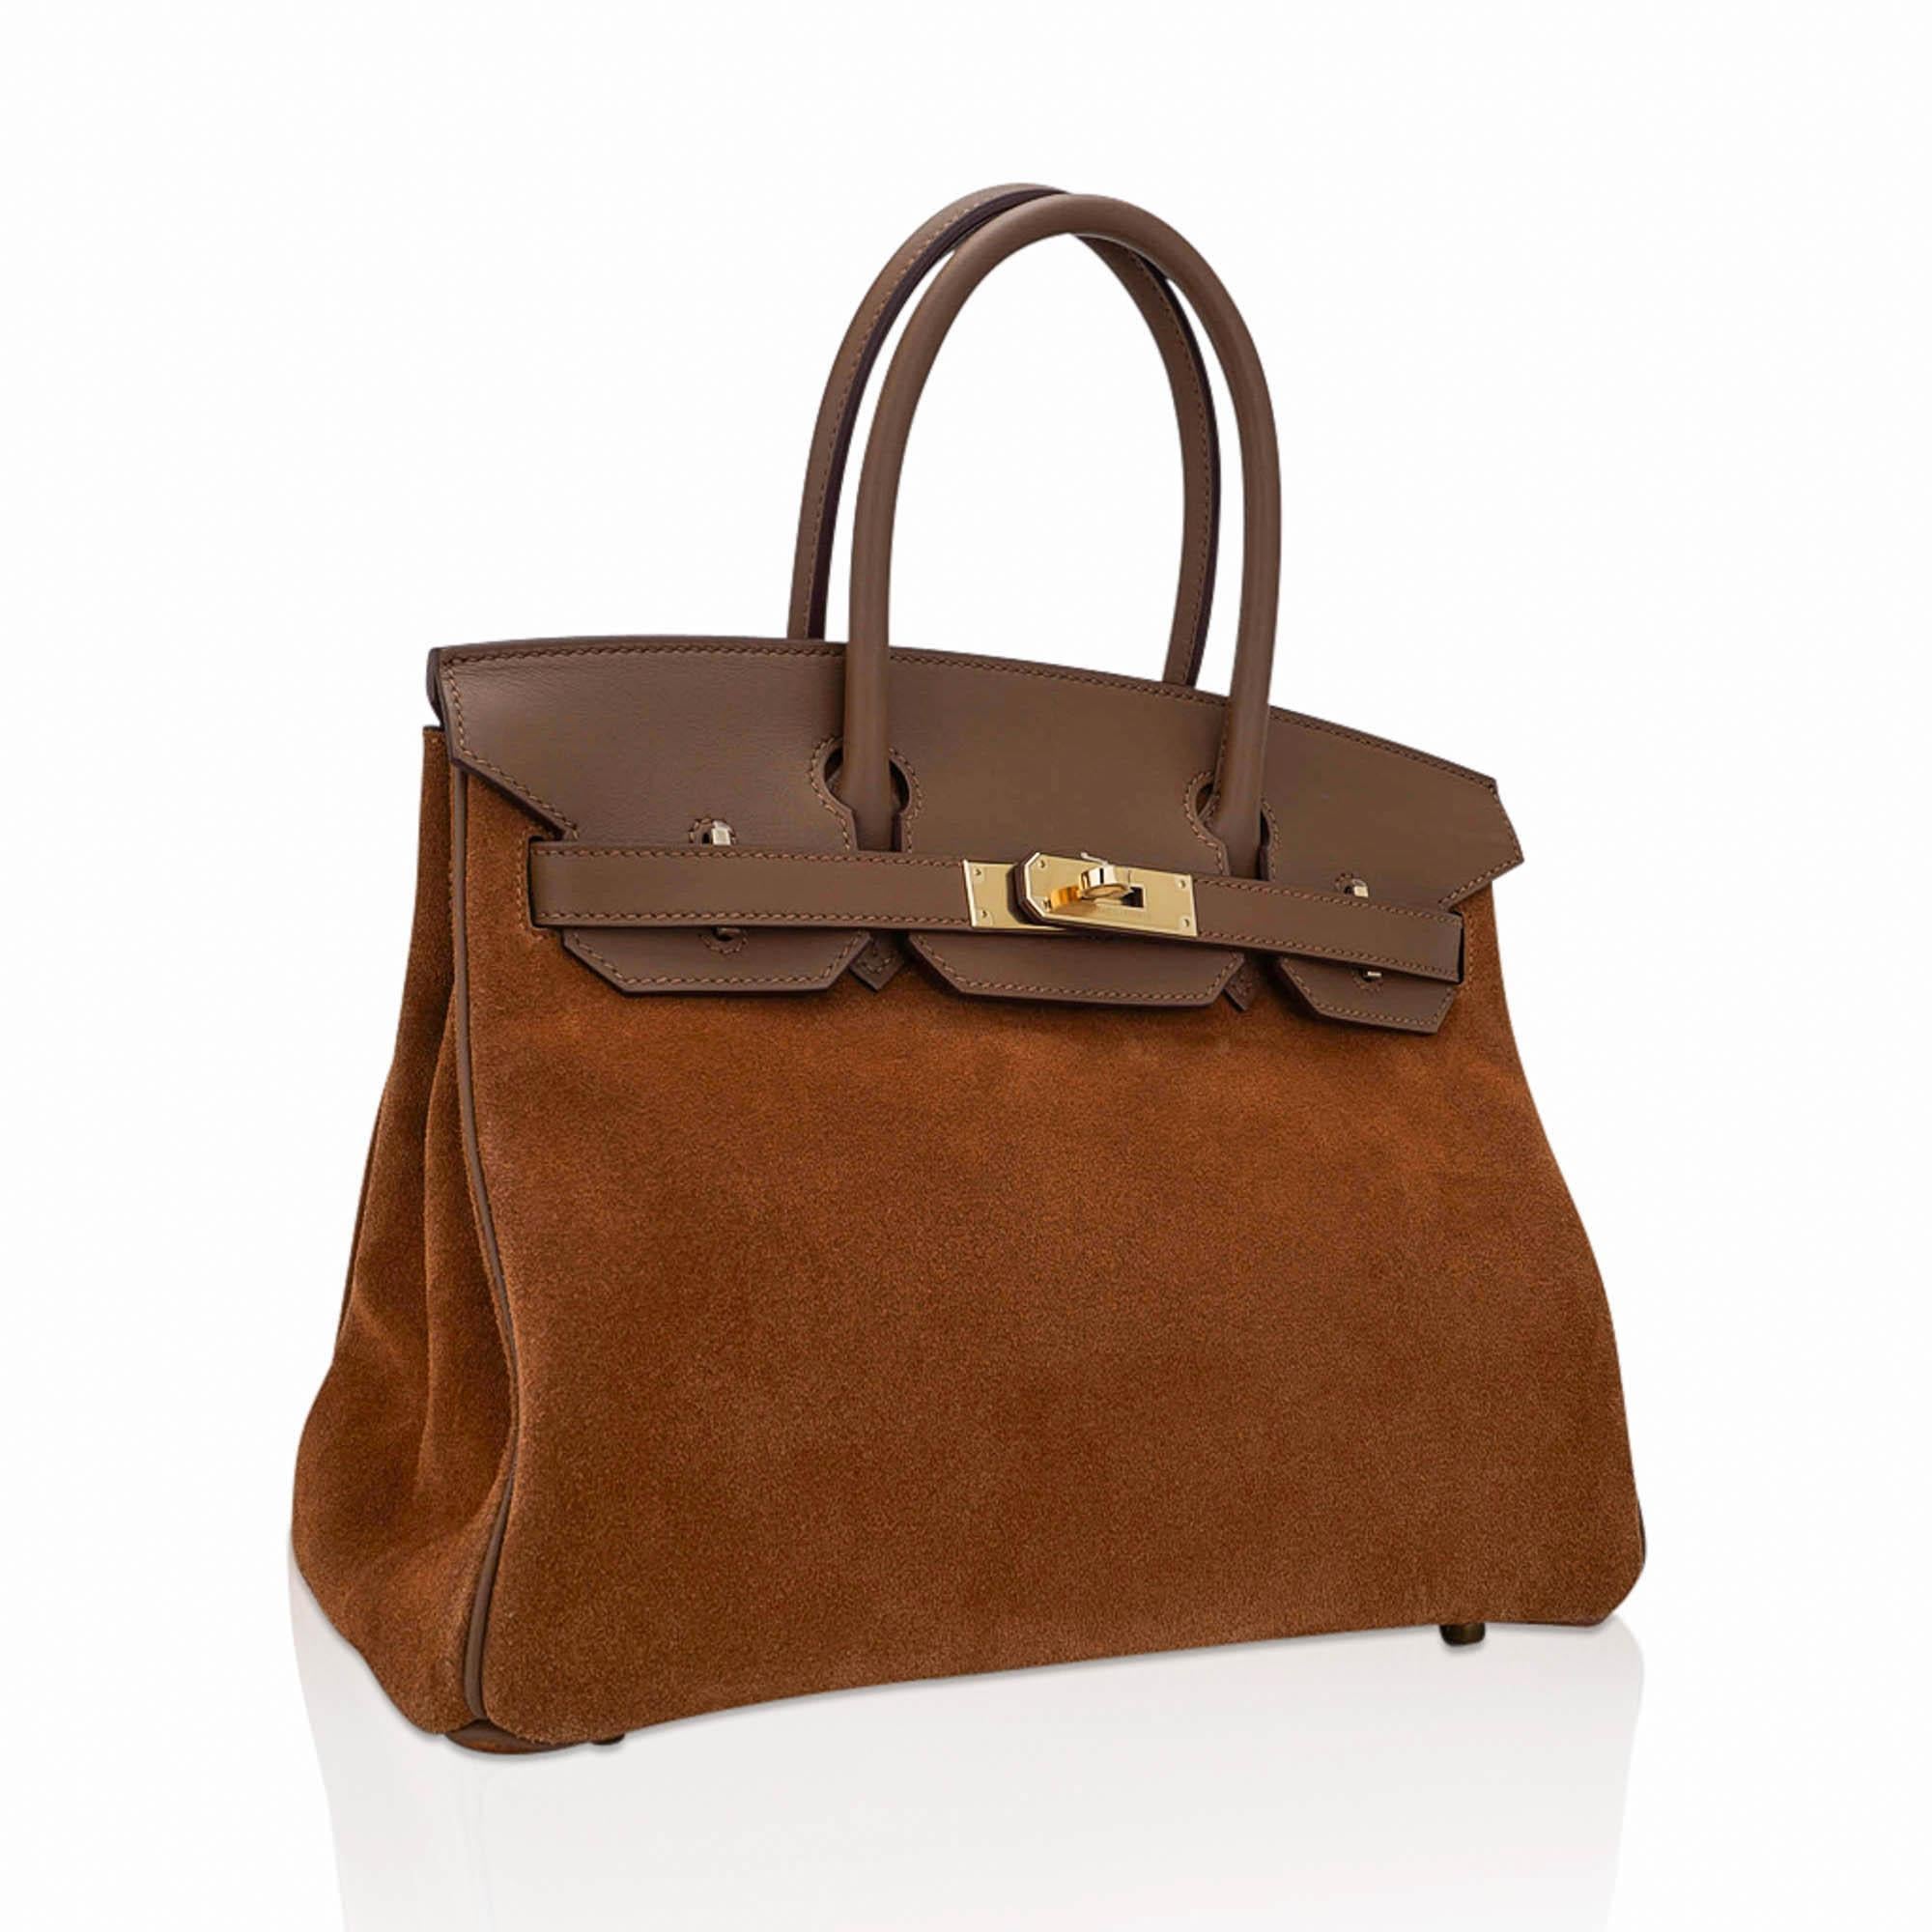 Mightychic offers an Hermes Grizzly Birkin 30 bag featured in warm Alezan.
Exquisite colour combination that is neutral and perfect for year round wear.
Comes with lock, keys, clochette, sleepers, raincoat and signature Hermes box.
NEW or NEVER